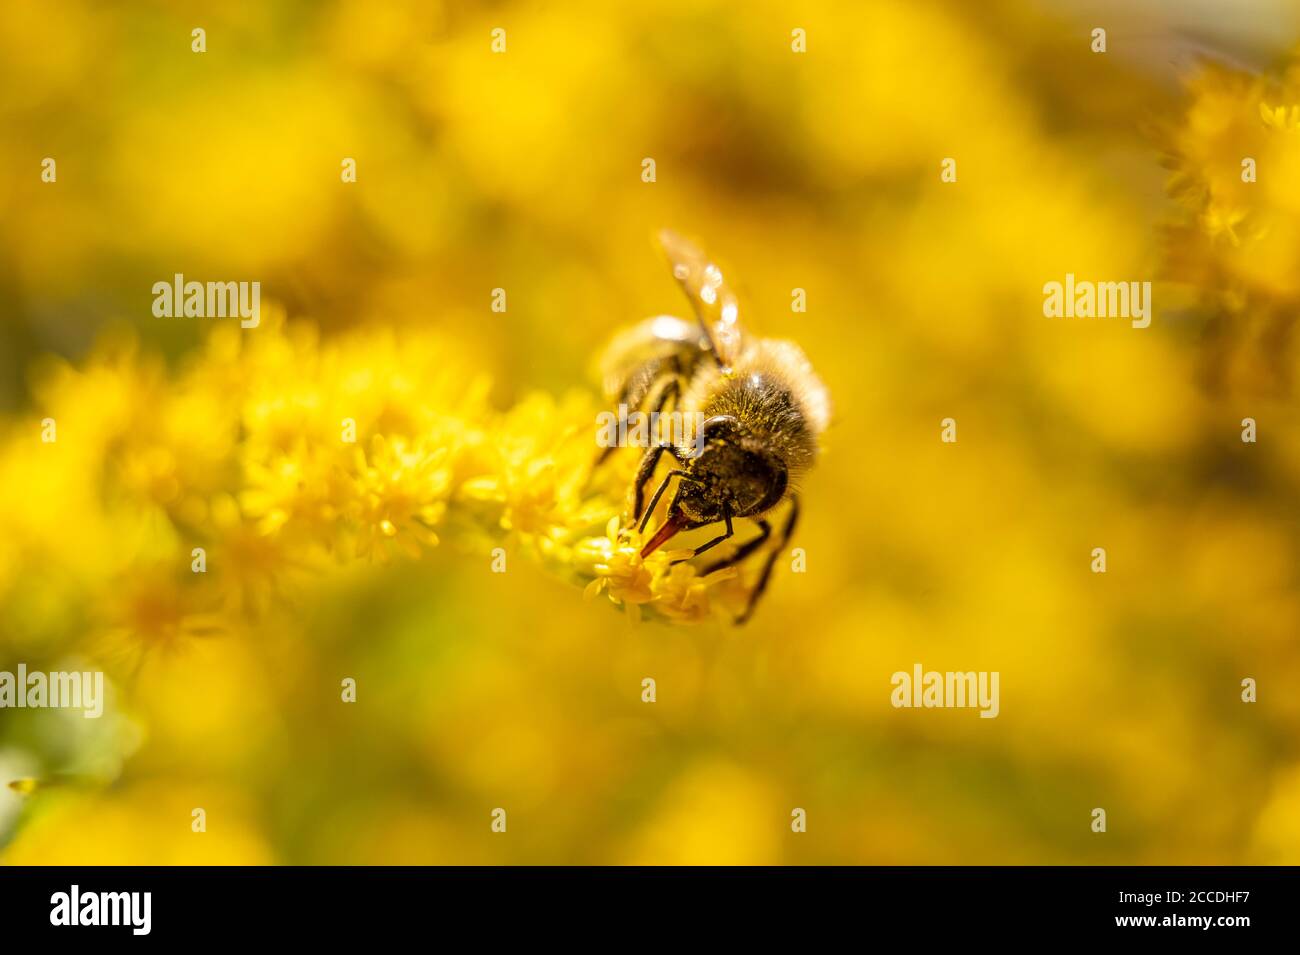 Small hard working bee gathering yellow flower pollen during sunny spring or summer day at the garden. Honeybees known for construction nests from wax Stock Photo